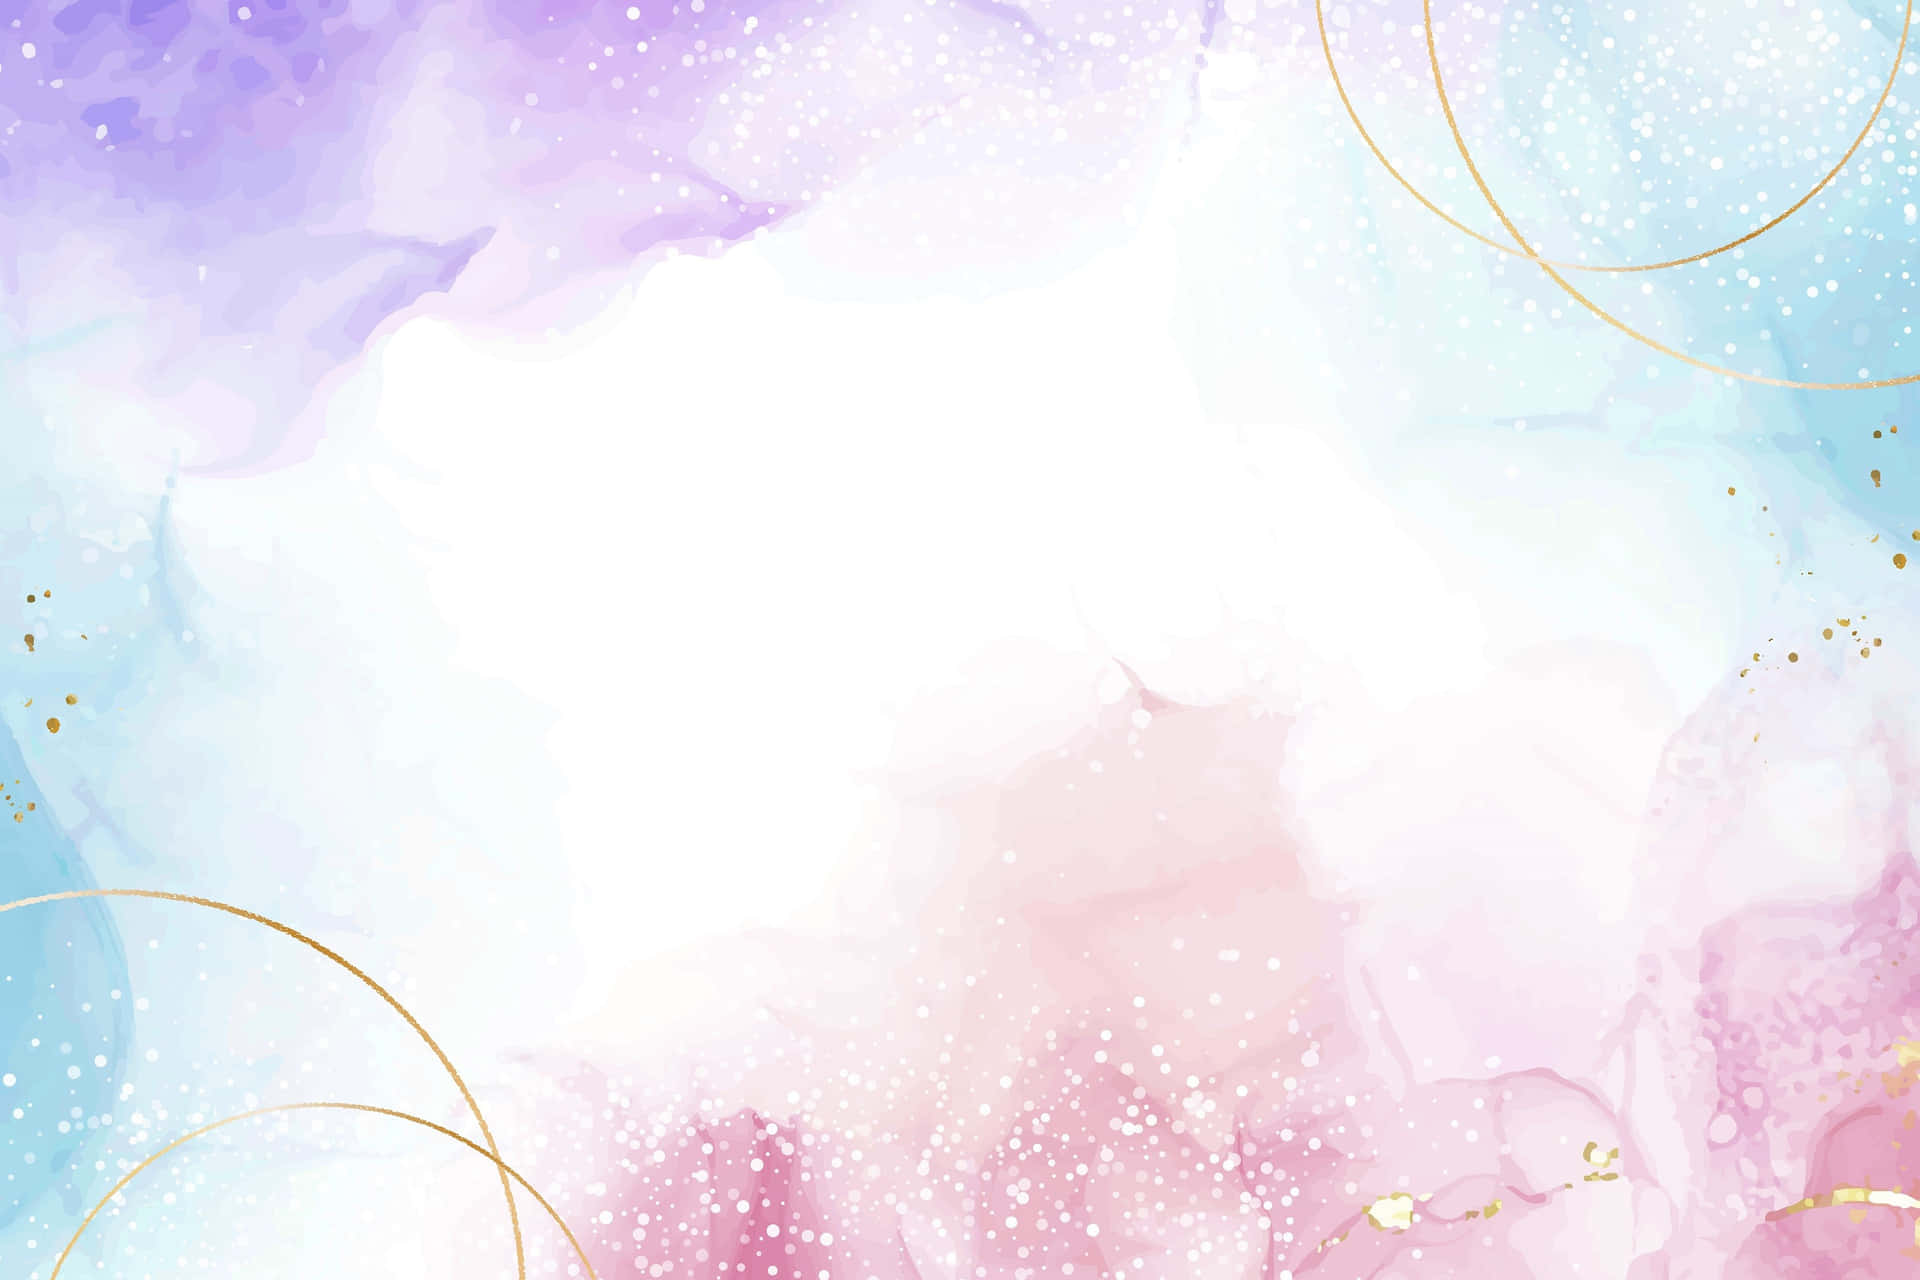 watercolor background with gold and blue stars